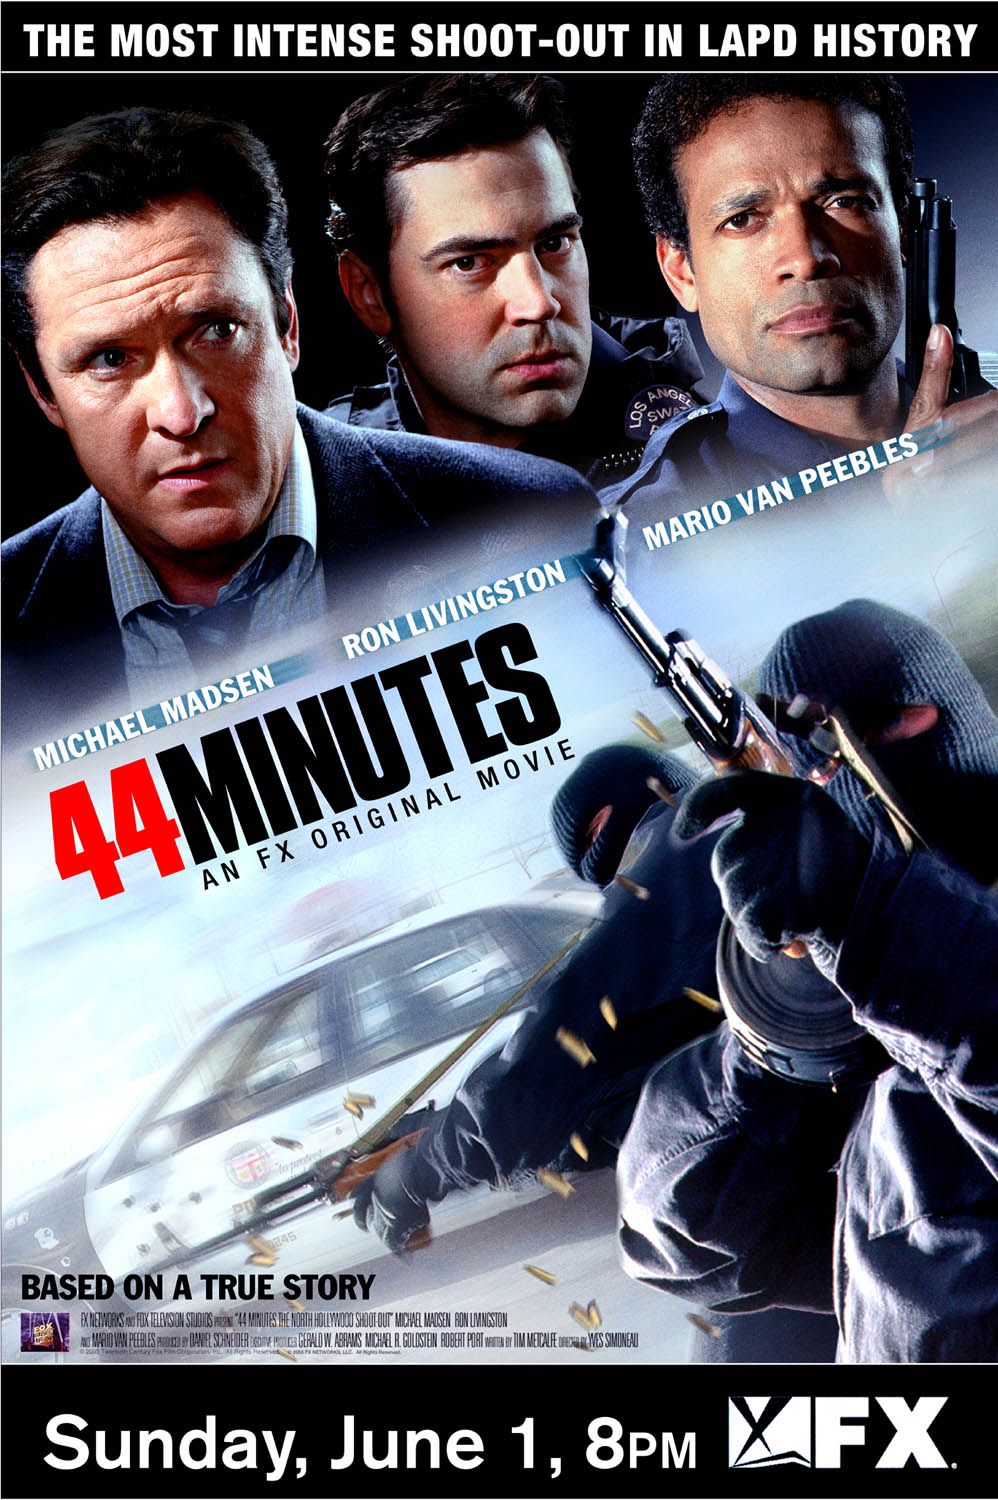 Extra Large TV Poster Image for 44 Minutes 